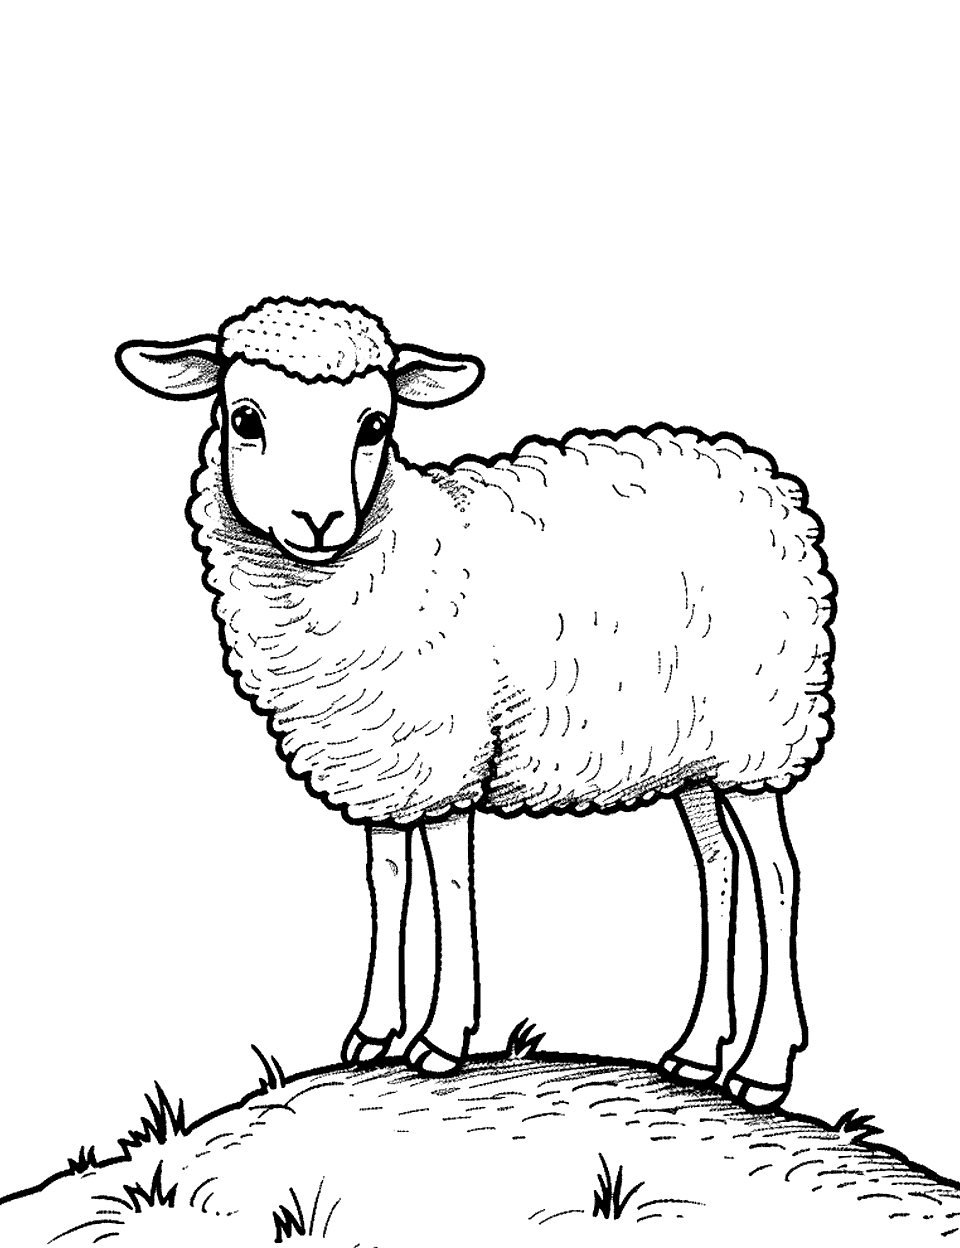 Cameroon Sheep on a Hill Coloring Page - A Cameroon sheep standing atop a small hill, looking into the distance.